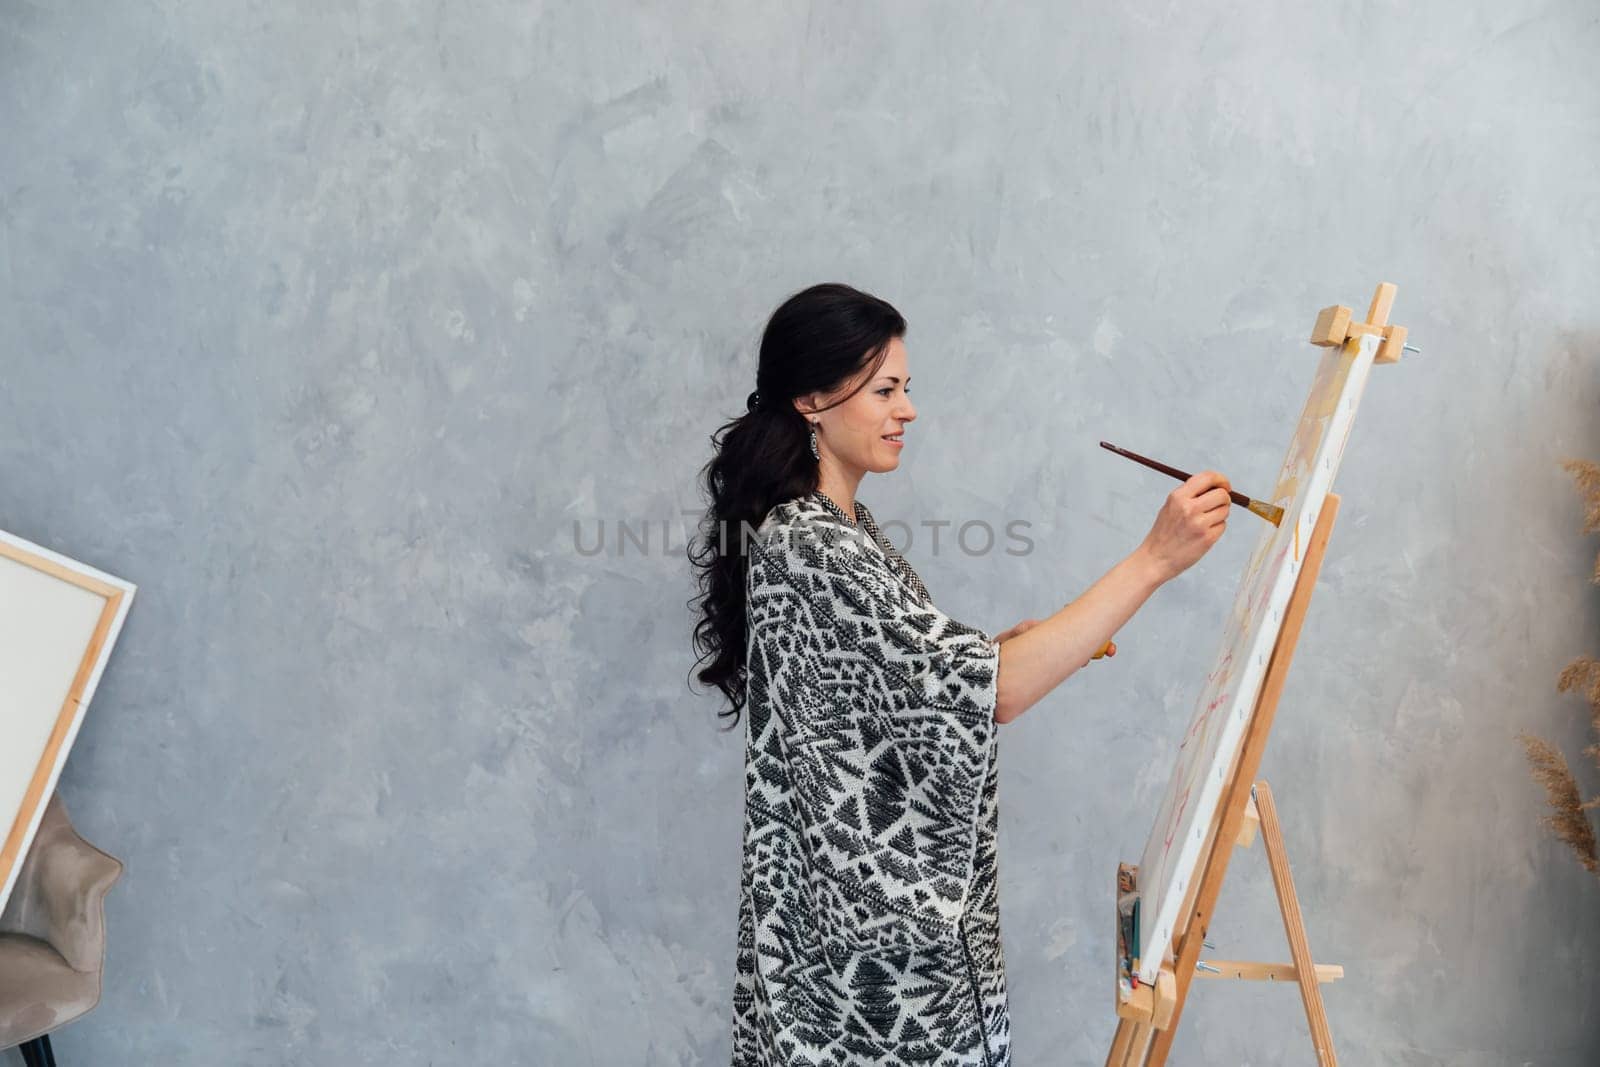 Female Artist Works on Abstract Oil Painting, Moving Paint Brush Energetically She Creates Modern Masterpiece. by Simakov